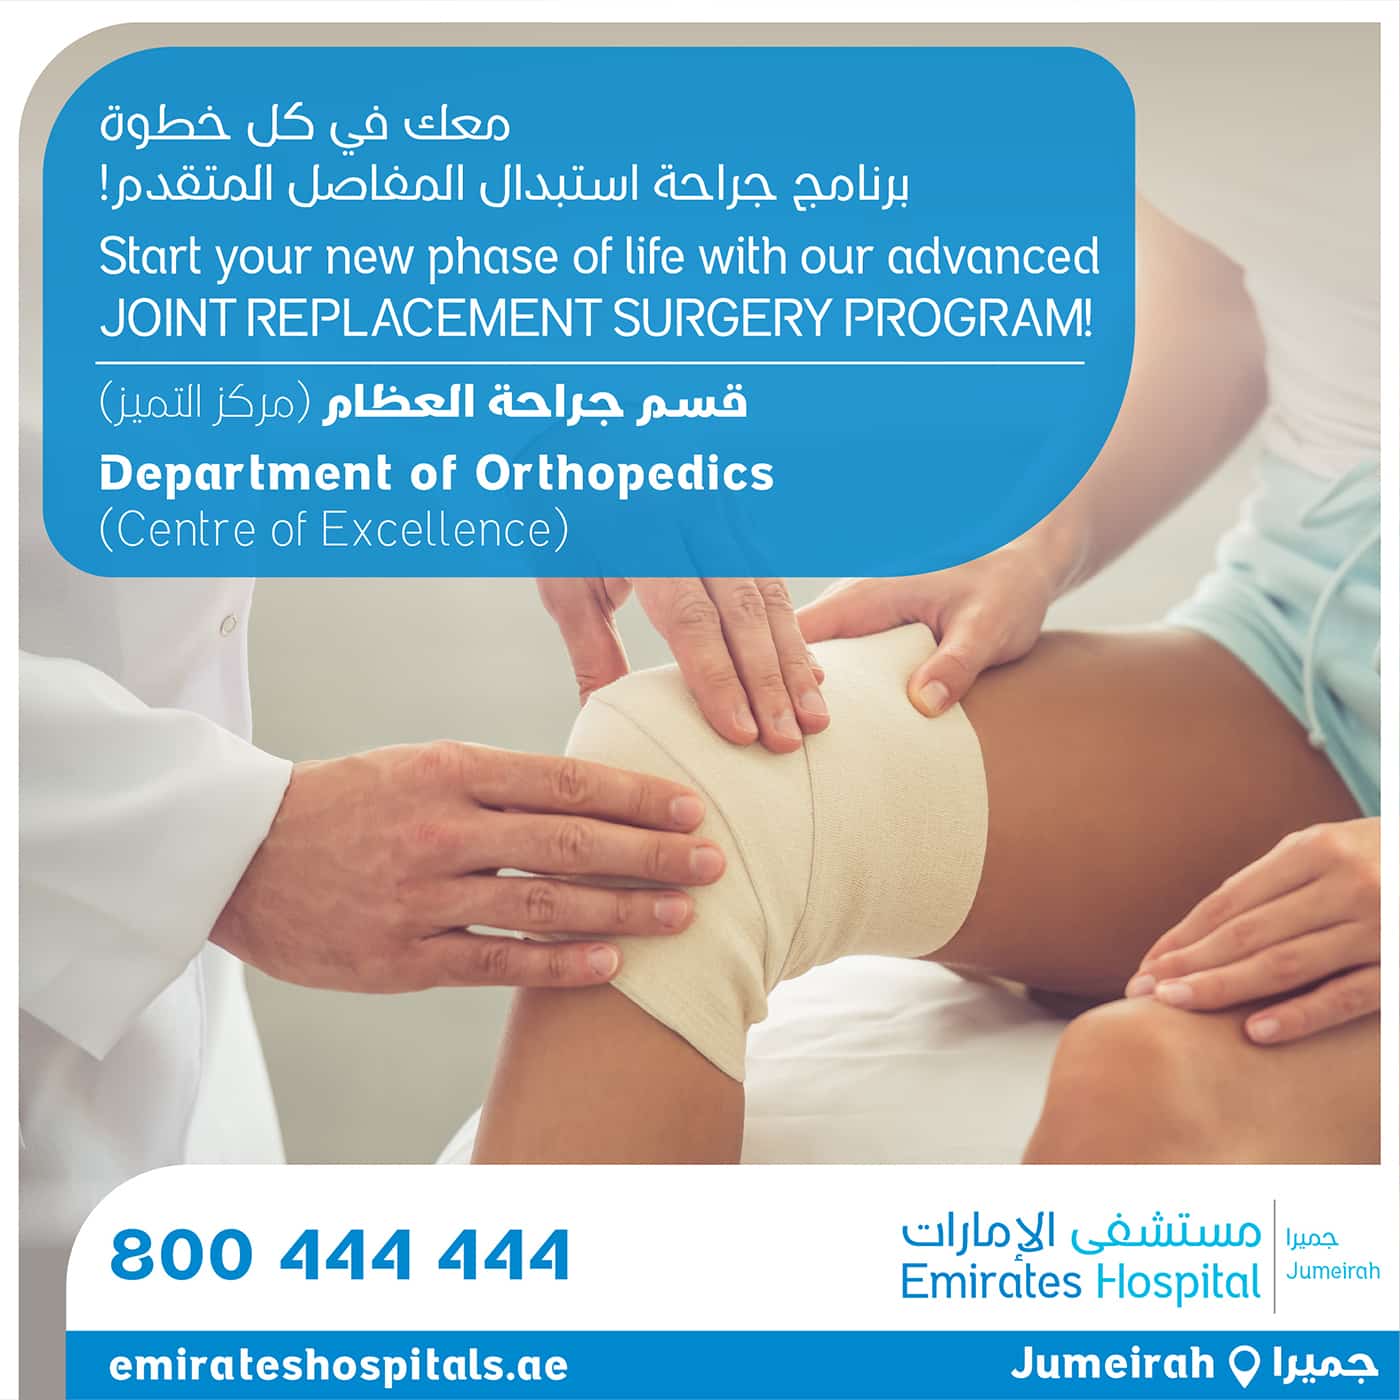 Start your new phase of life with our advanced Joint Replacement Surgery Program